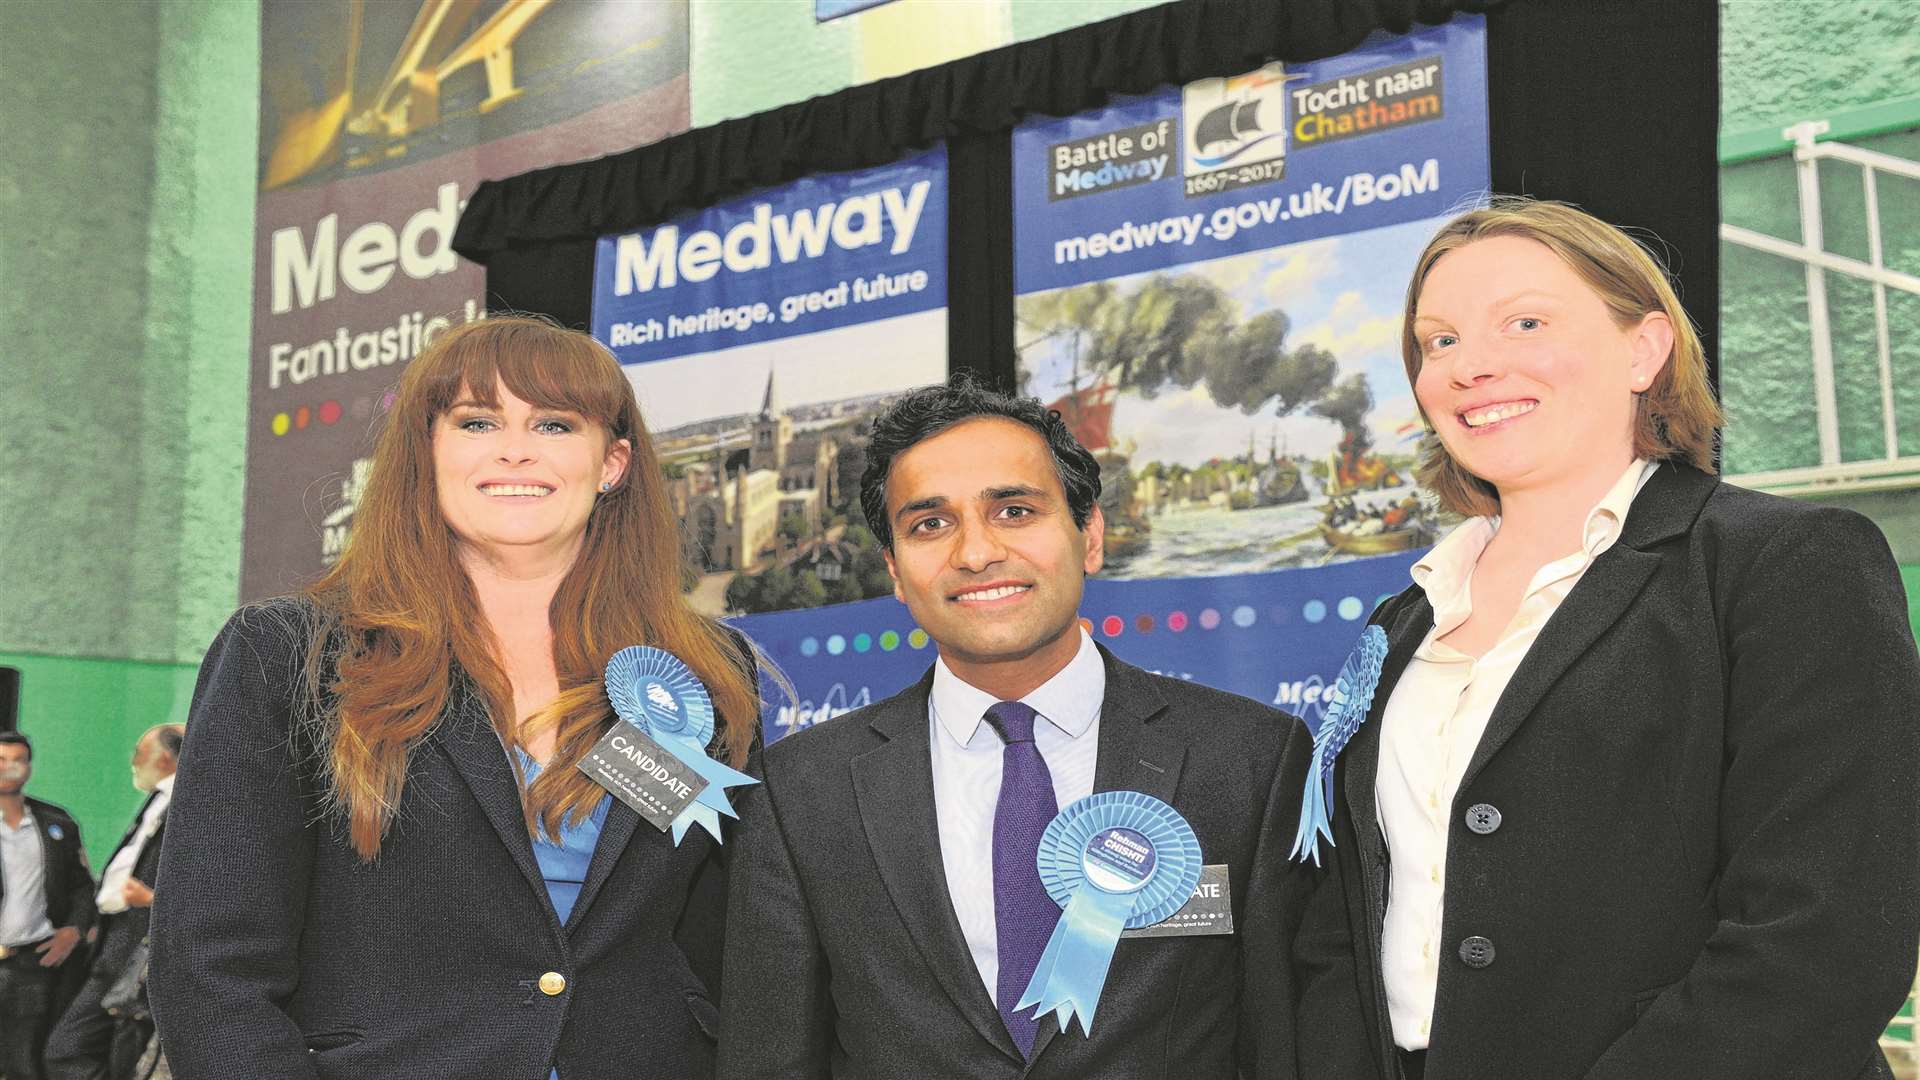 Rehman Chishti with Kelly Tolhurst and Tracey Crouch